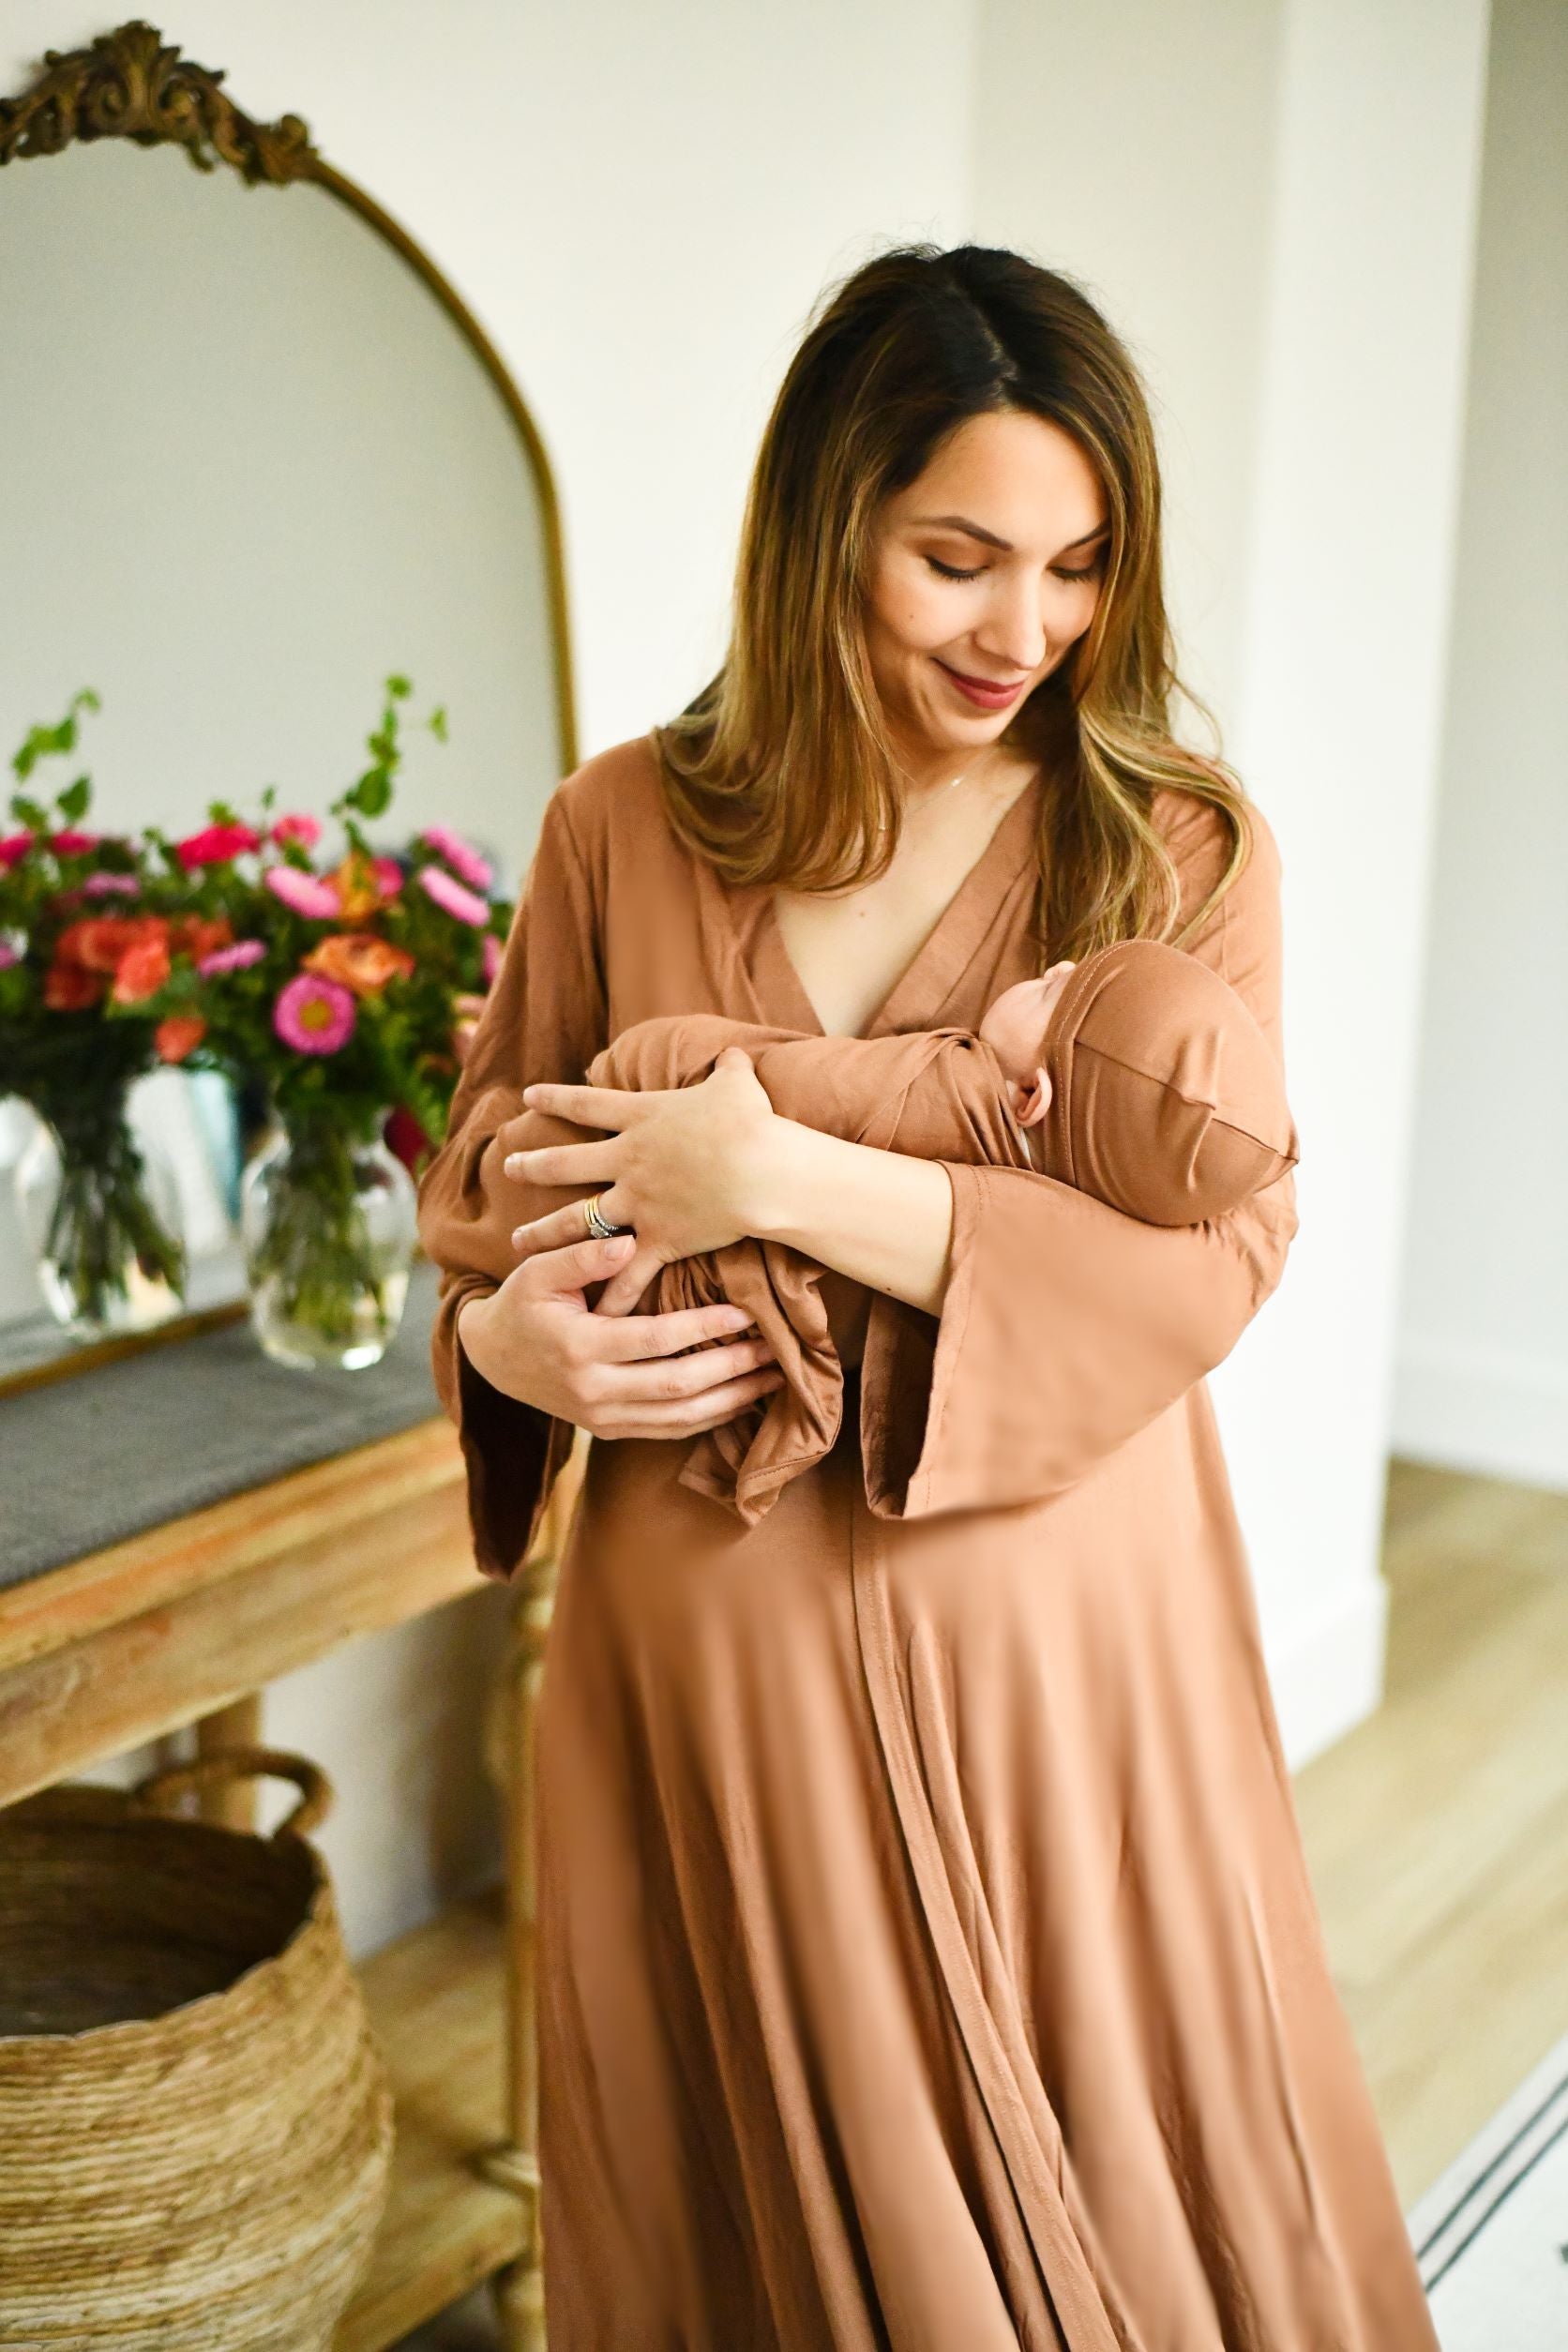 Top 5 Picks for Labor and Birth Gowns